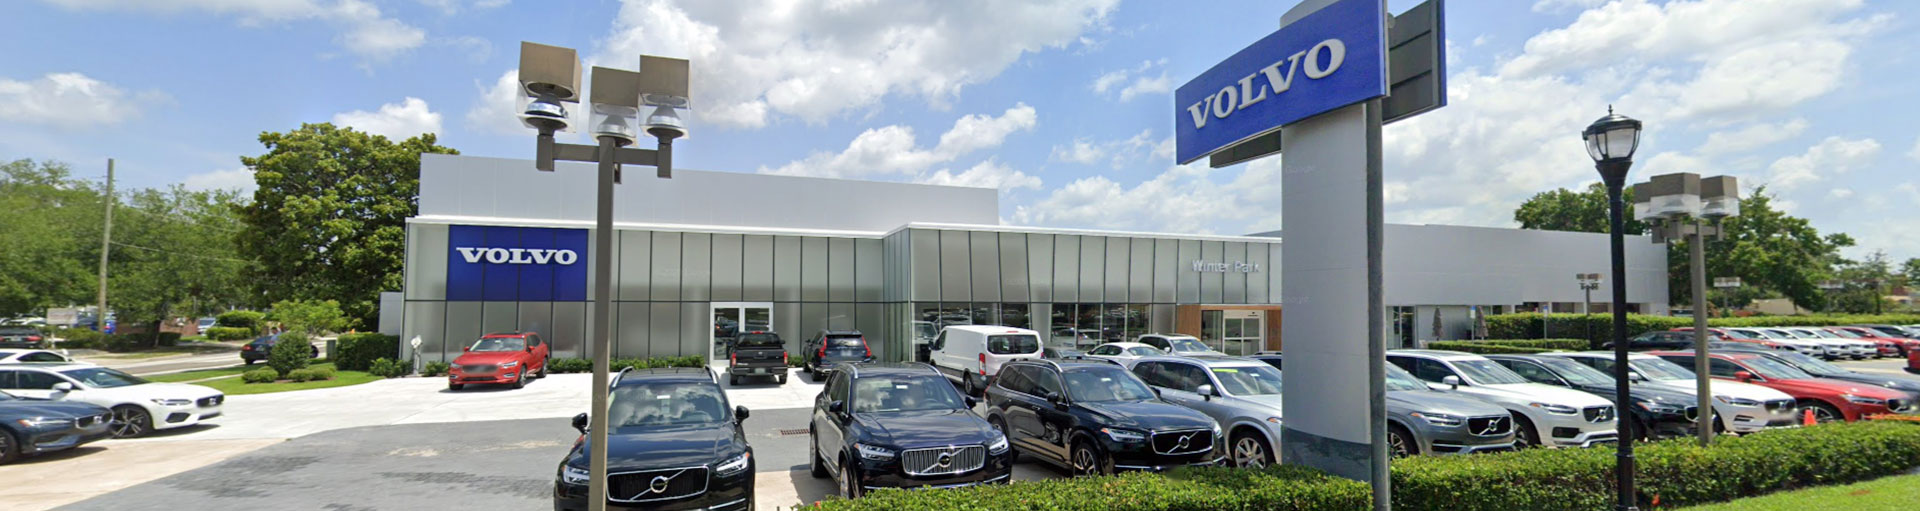 The Volvo Store Windshield Wiper Blade Replacement Service